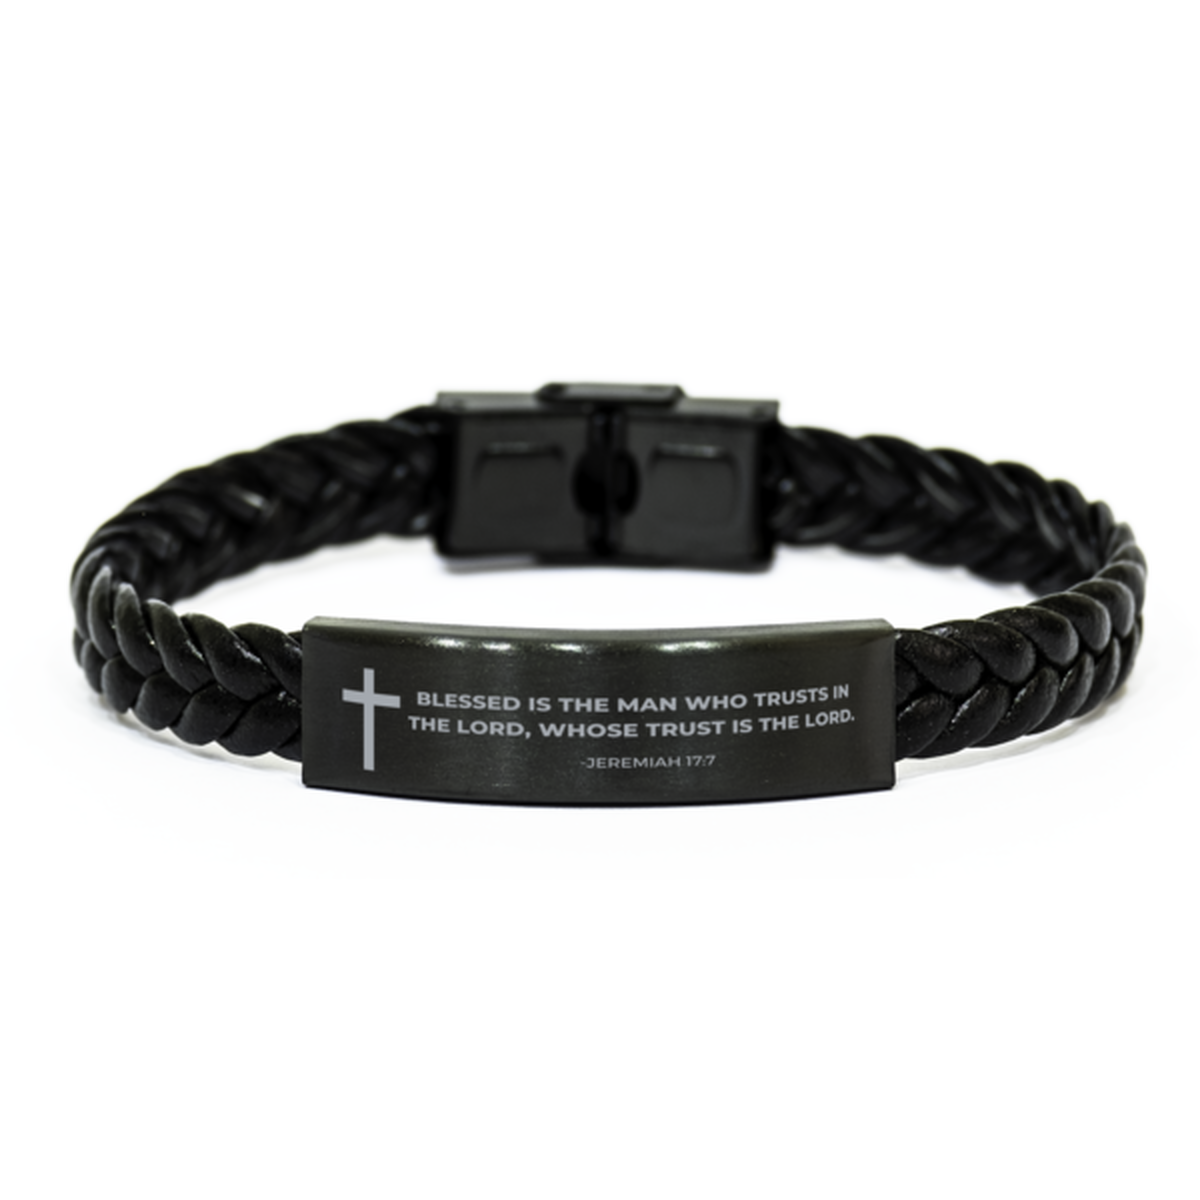 Baptism Gifts For Teenage Boys Girls, Christian Bible Verse Braided Leather Bracelet, Blessed is the man who trusts, Catholic Confirmation Gifts for Son, Godson, Grandson, Nephew